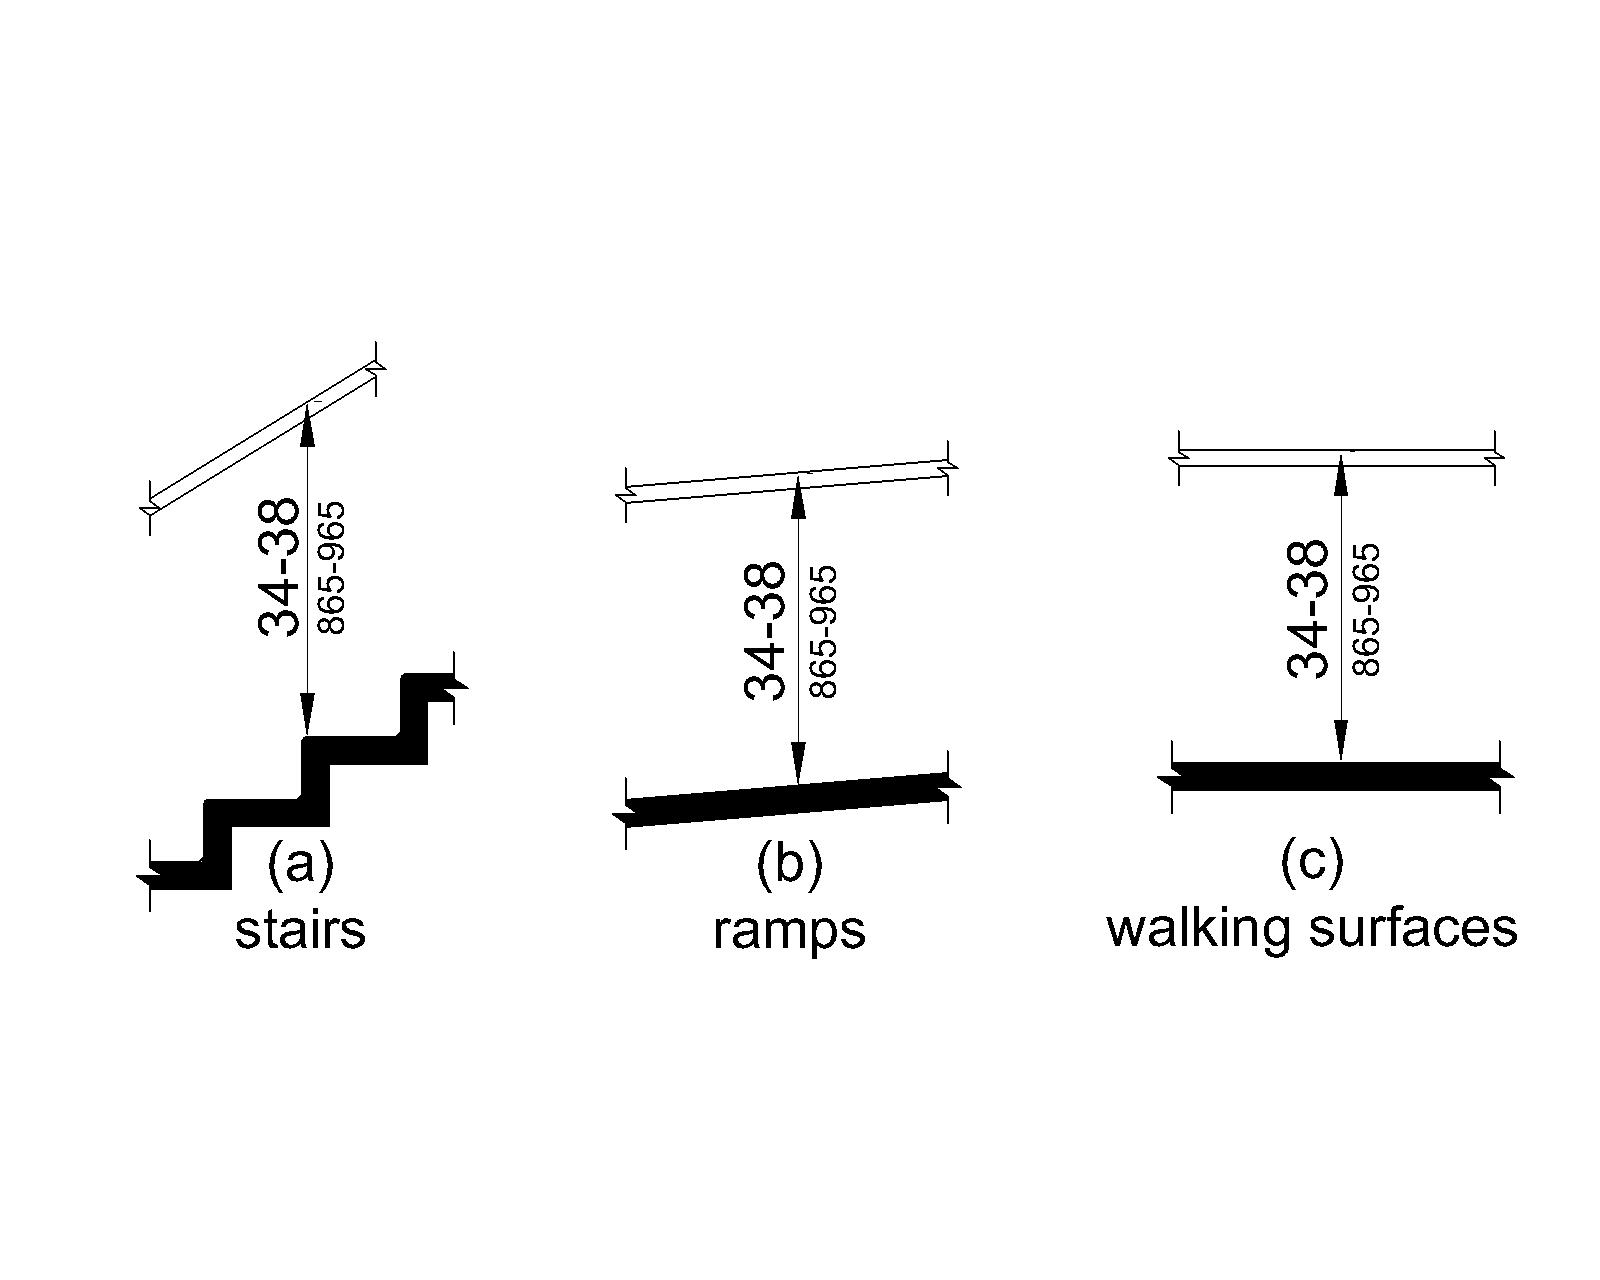 Figure (a) shows stairs with the top gripping surface of a handrail 34 to 38 inches (865 to 965 mm) above stair nosings.  Figures (b) and (c) show ramps and walking surfaces, respectively. The top gripping surface of a handrail is 34 to 38 inches (865 to 965 mm) above the surface.